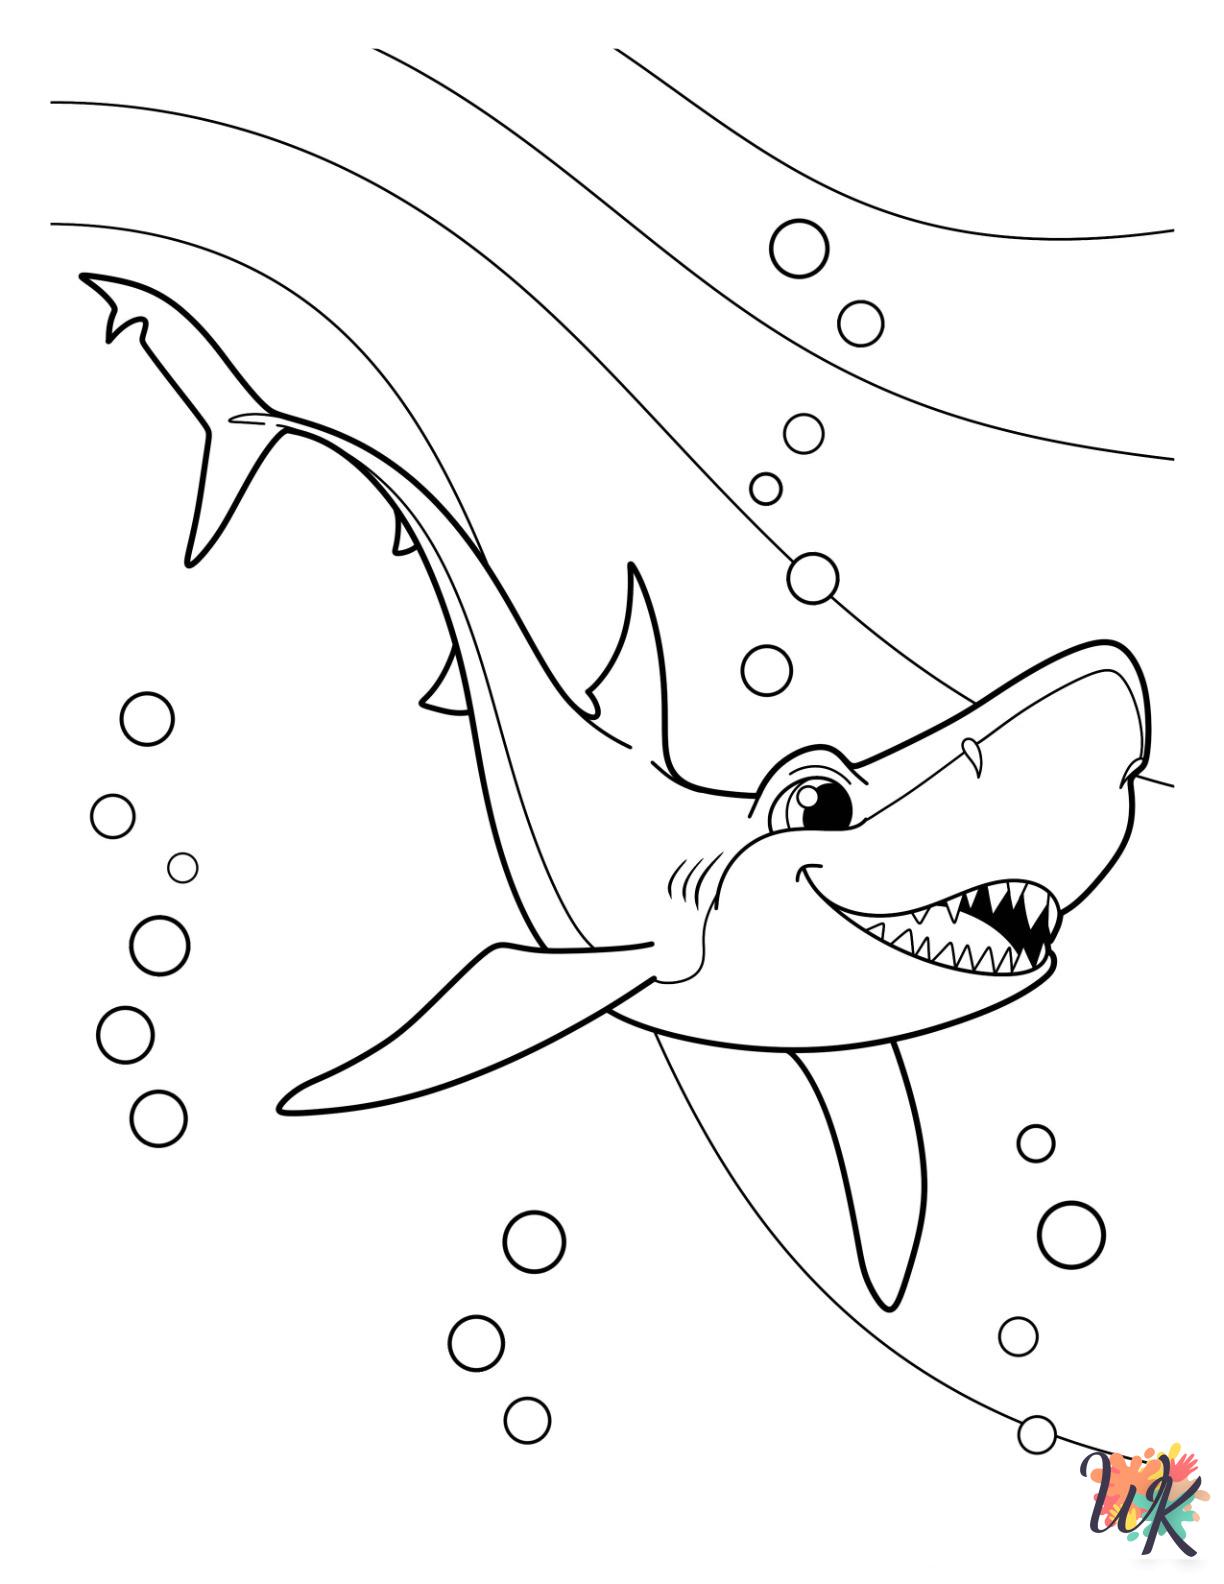 Shark themed coloring pages